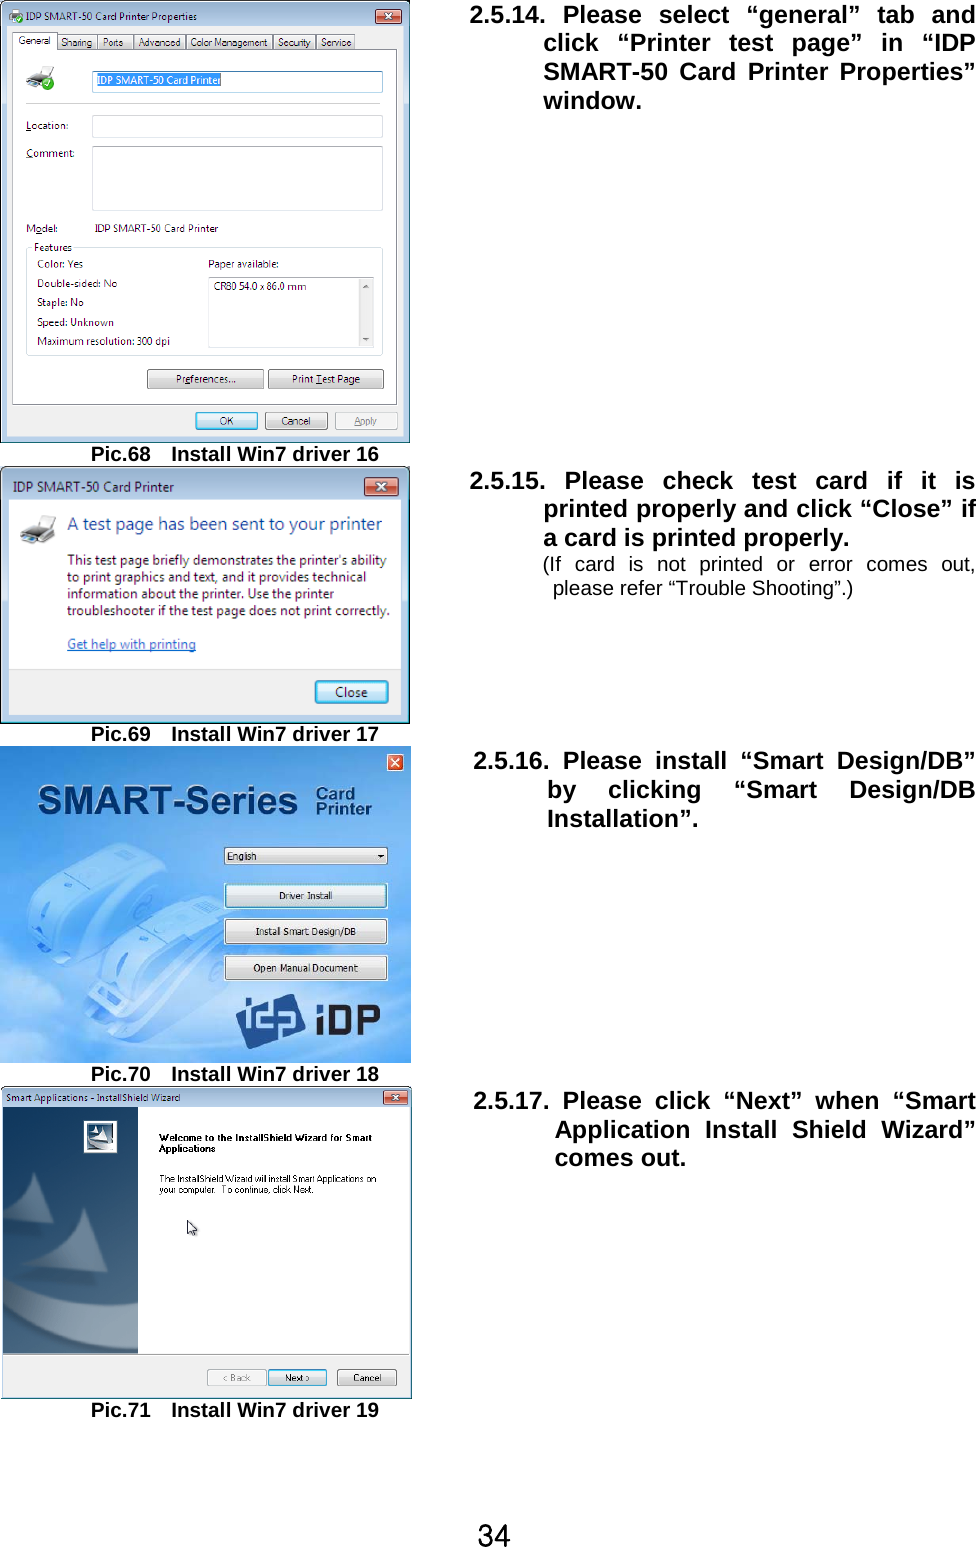 Z[Pic.68 Install Win7 driver 162.5.14. Please select“general” tab andclick “Printer test page” in “IDPSMART-50 Card Printer Properties”window.Pic.69 Install Win7 driver 172.5.15. Please check test card if it isprinted properly and click “Close” ifa card is printed properly.(If card is not printed or error comes out,please refer “Trouble Shooting”.)Pic.70 Install Win7 driver 182.5.16. Please install “Smart Design/DB”by clicking “Smart Design/DBInstallation”.Pic.71 Install Win7 driver 192.5.17. Please click “Next” when “SmartApplication Install Shield Wizard”comes out.